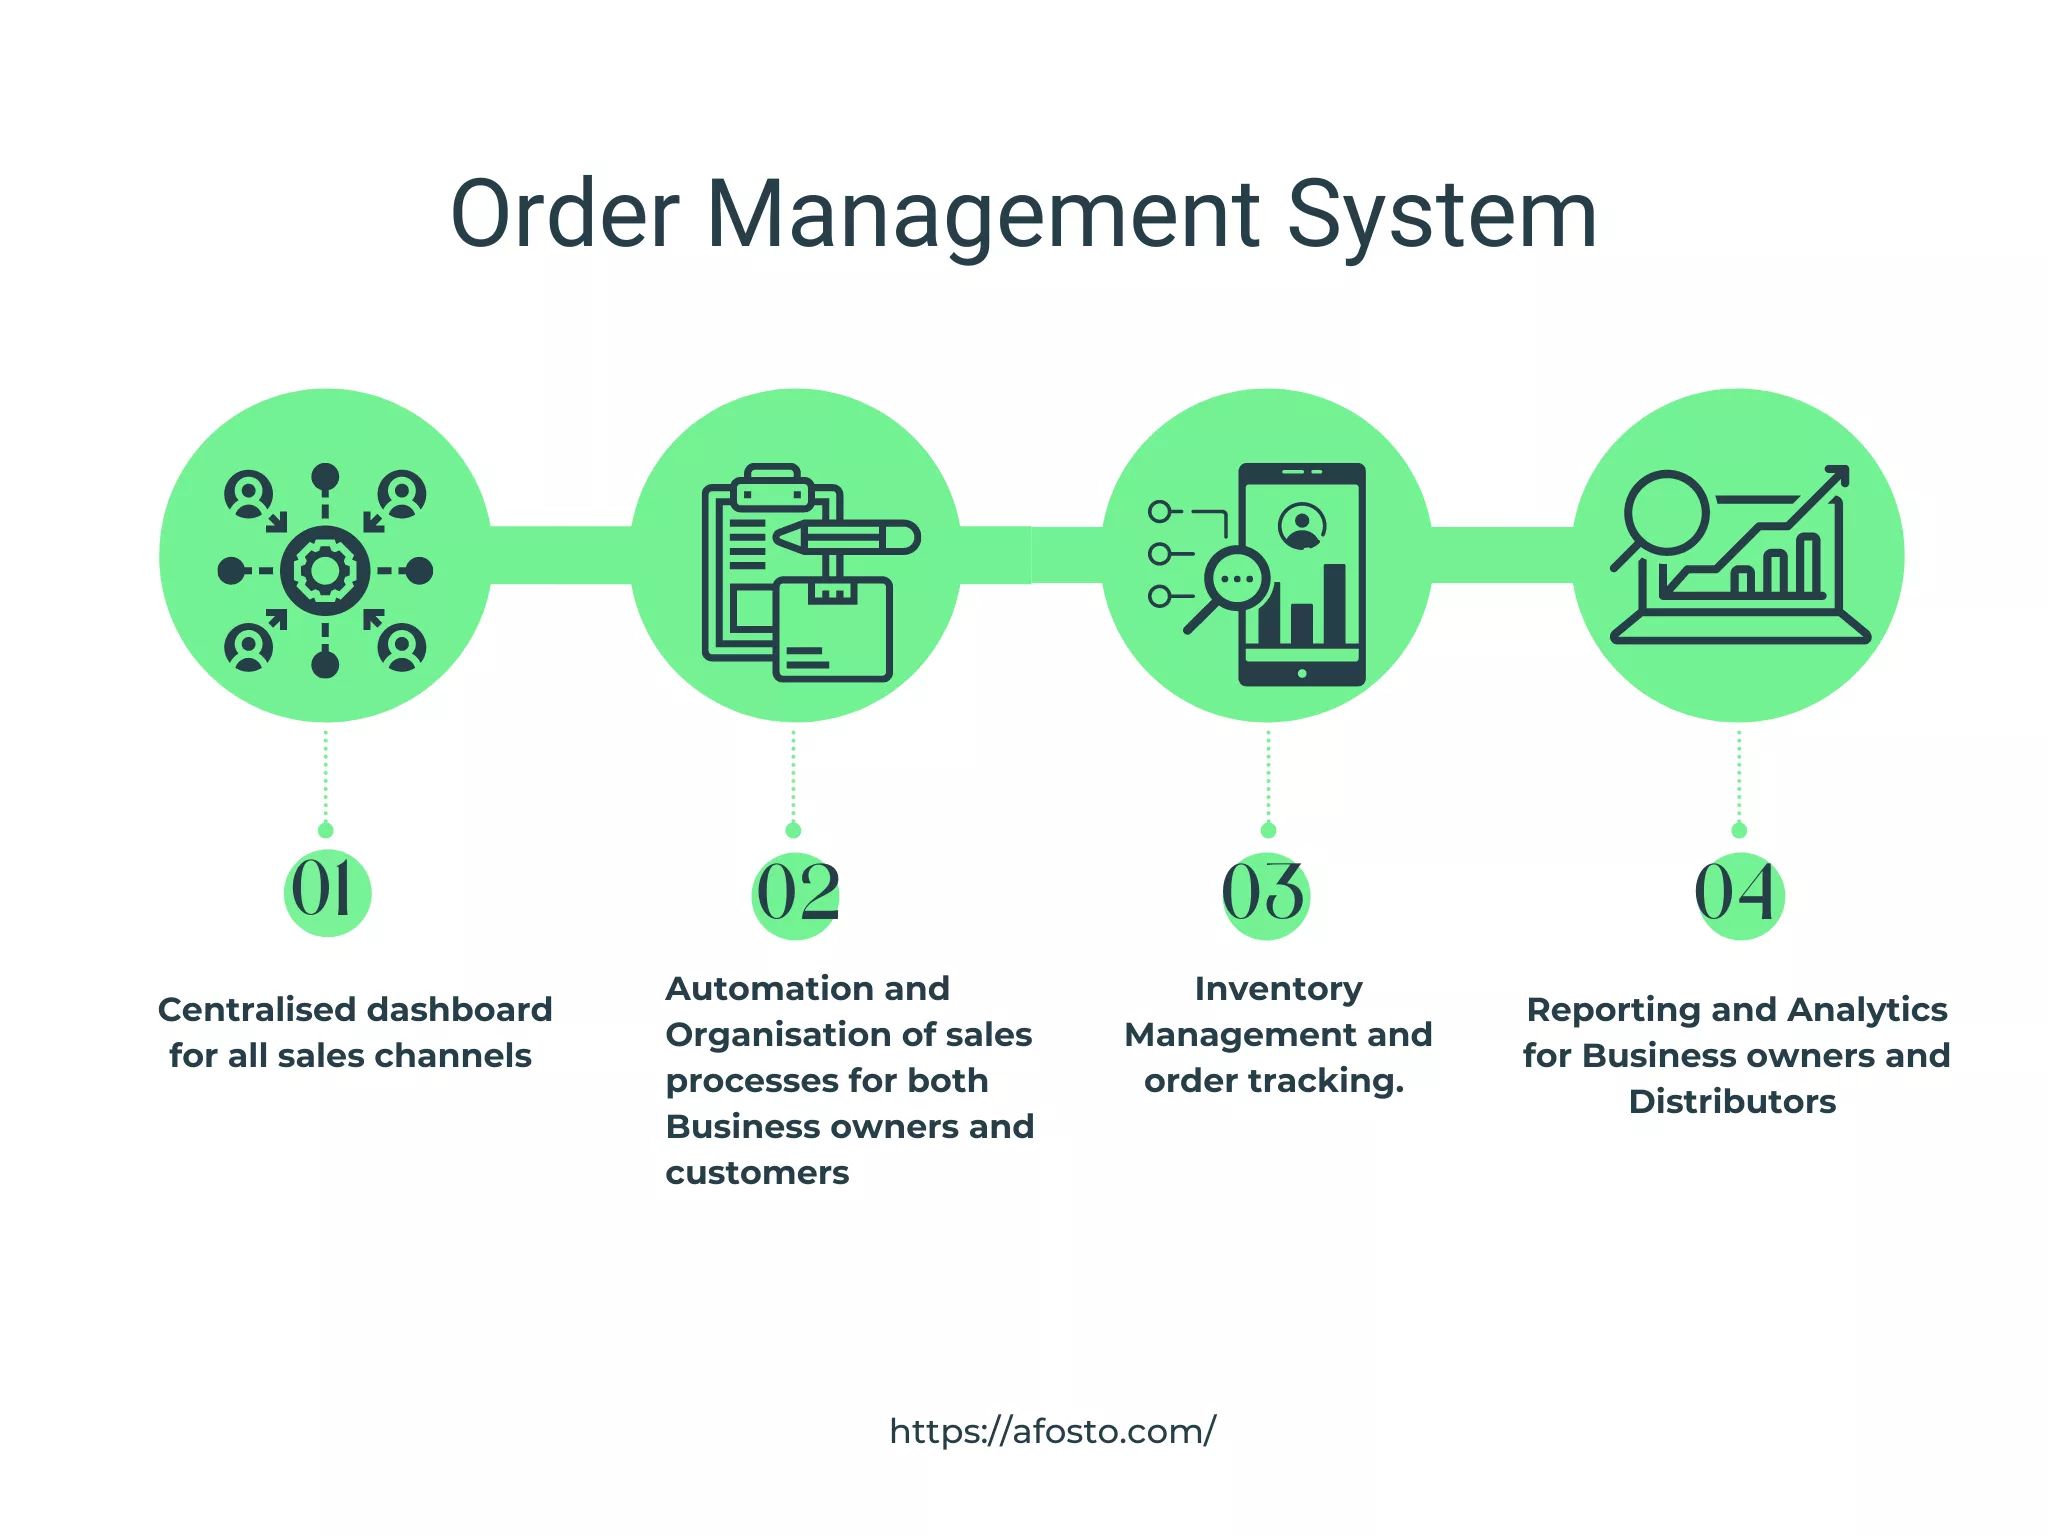 The definition of an order management system